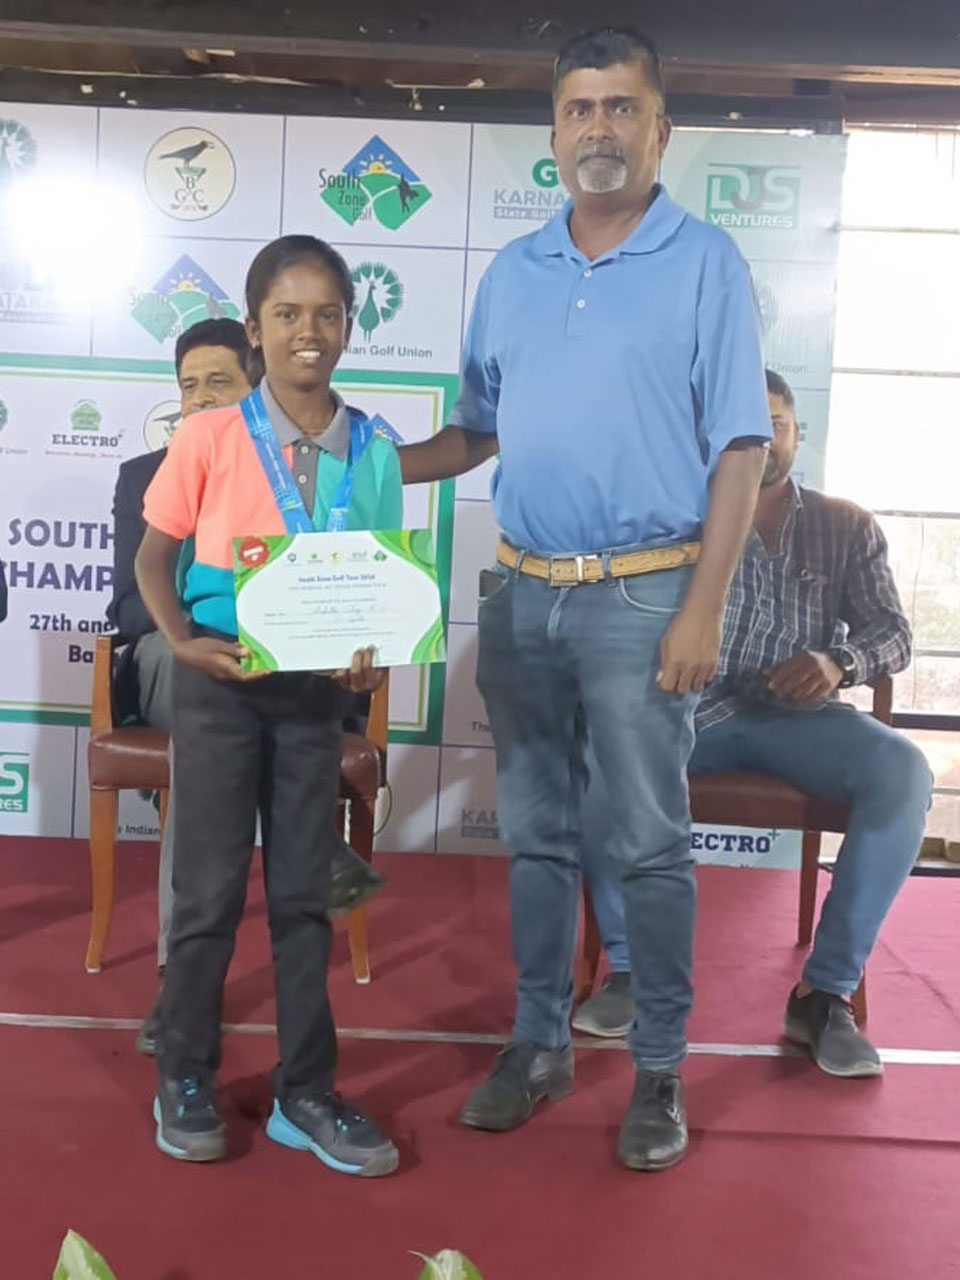 Arpita Shaji finished 2nd in the 'D' Girls category at the IGU South Zone Golf Championship held at Bangalore Golf Club with scores of 87 and 85.